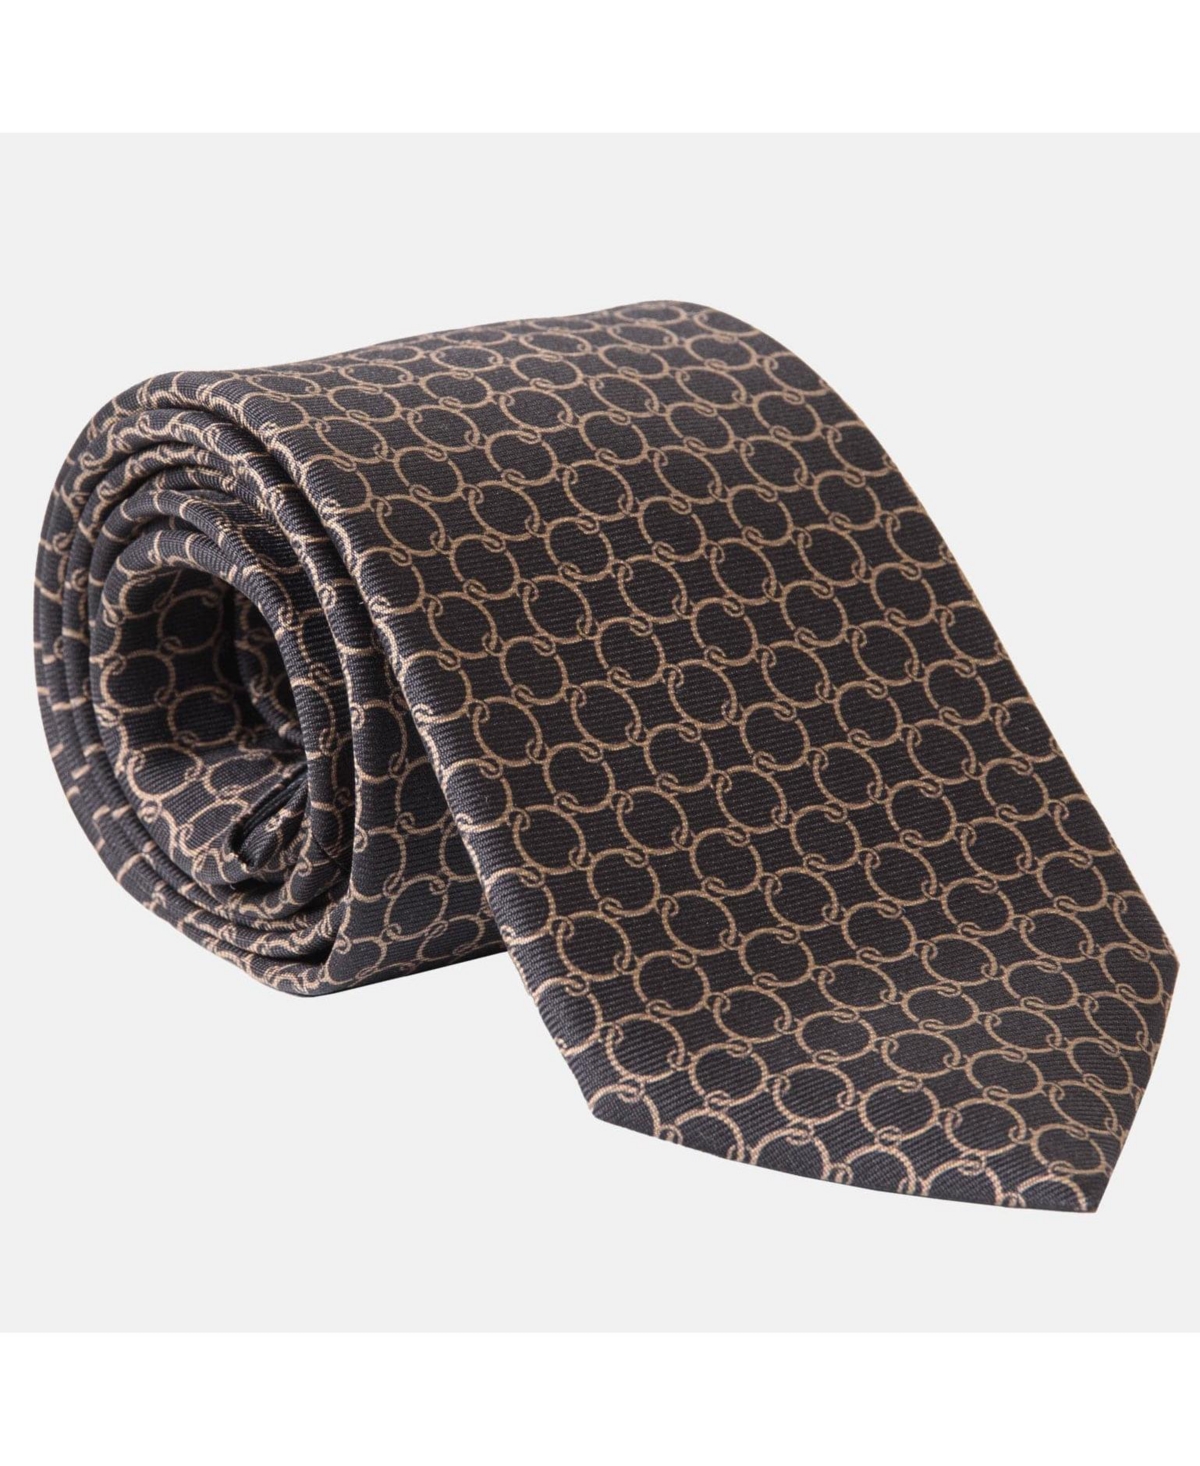 Big & Tall Monza - Extra Long Printed Silk Tie for Men - Charcoal